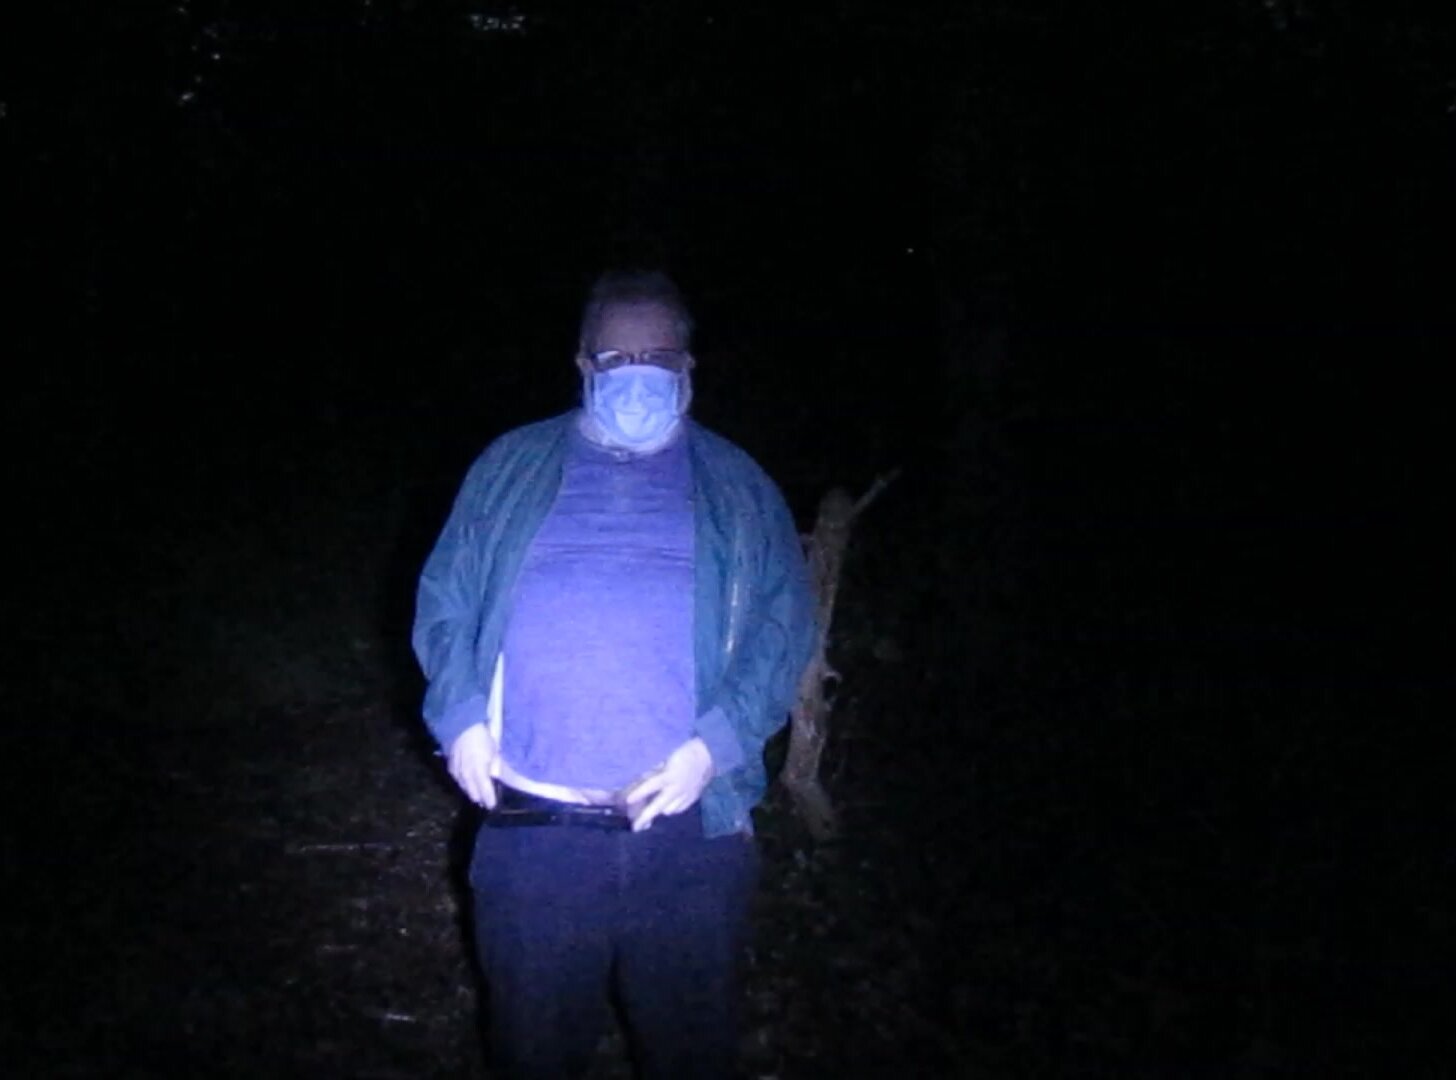 A Piss by Torchlight